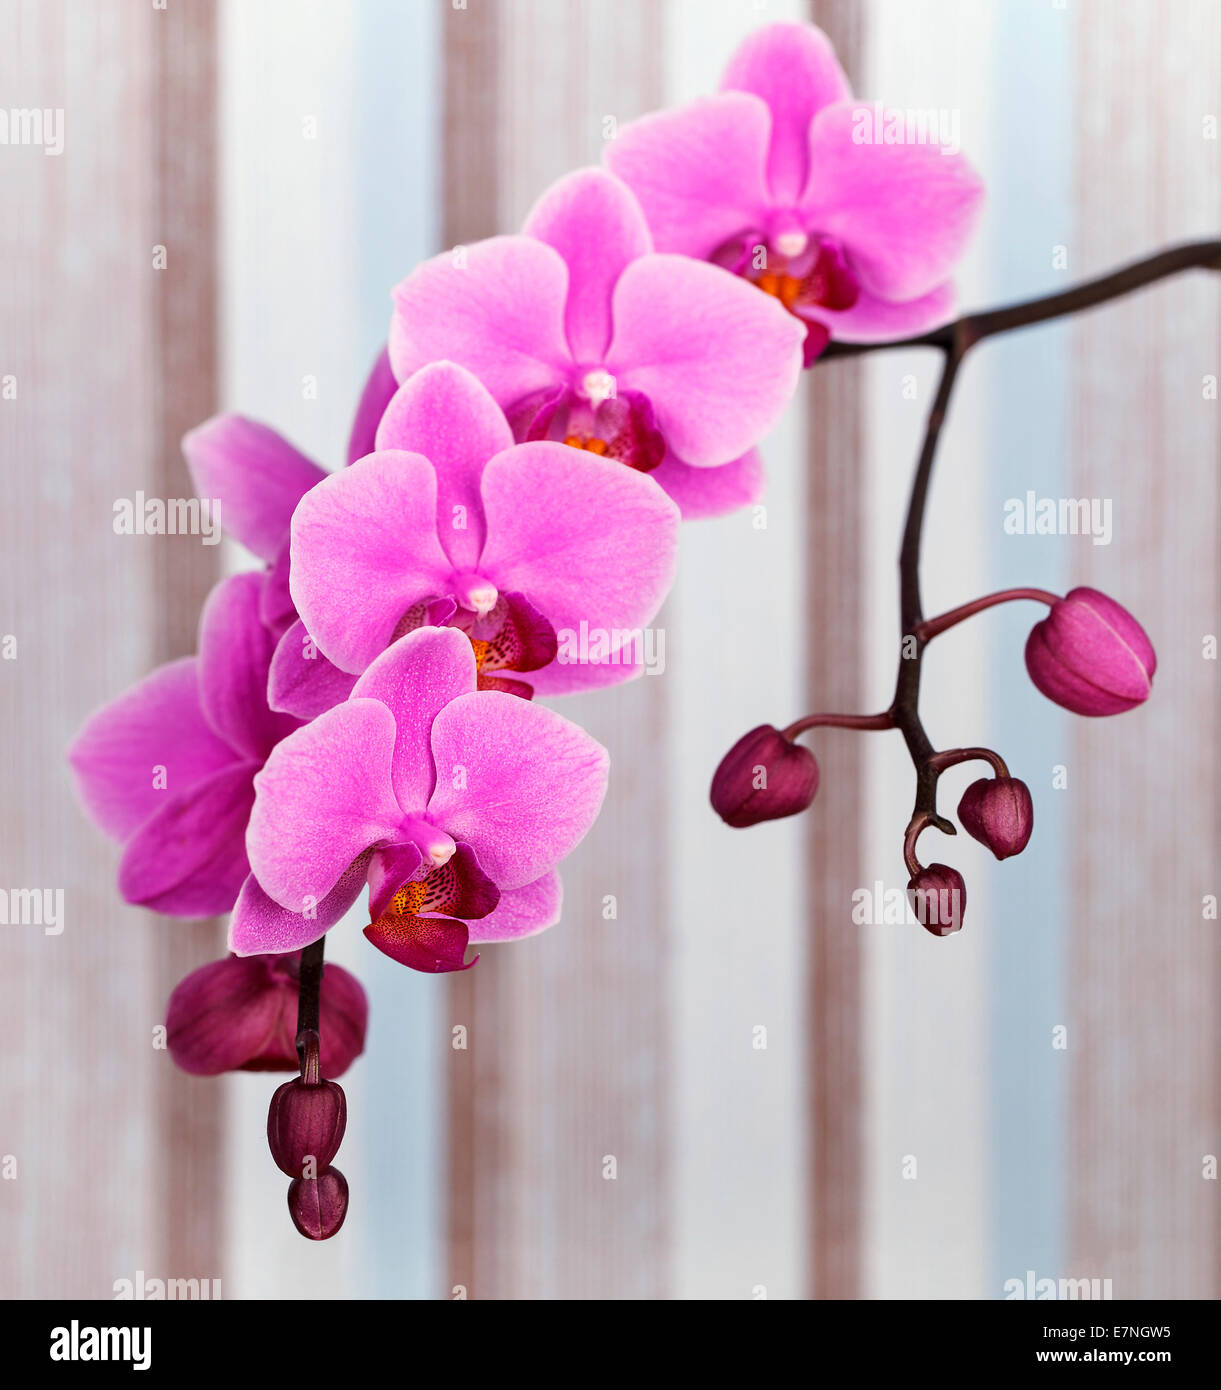 close up shot of pink orchid flower on a pastel striped background Stock Photo